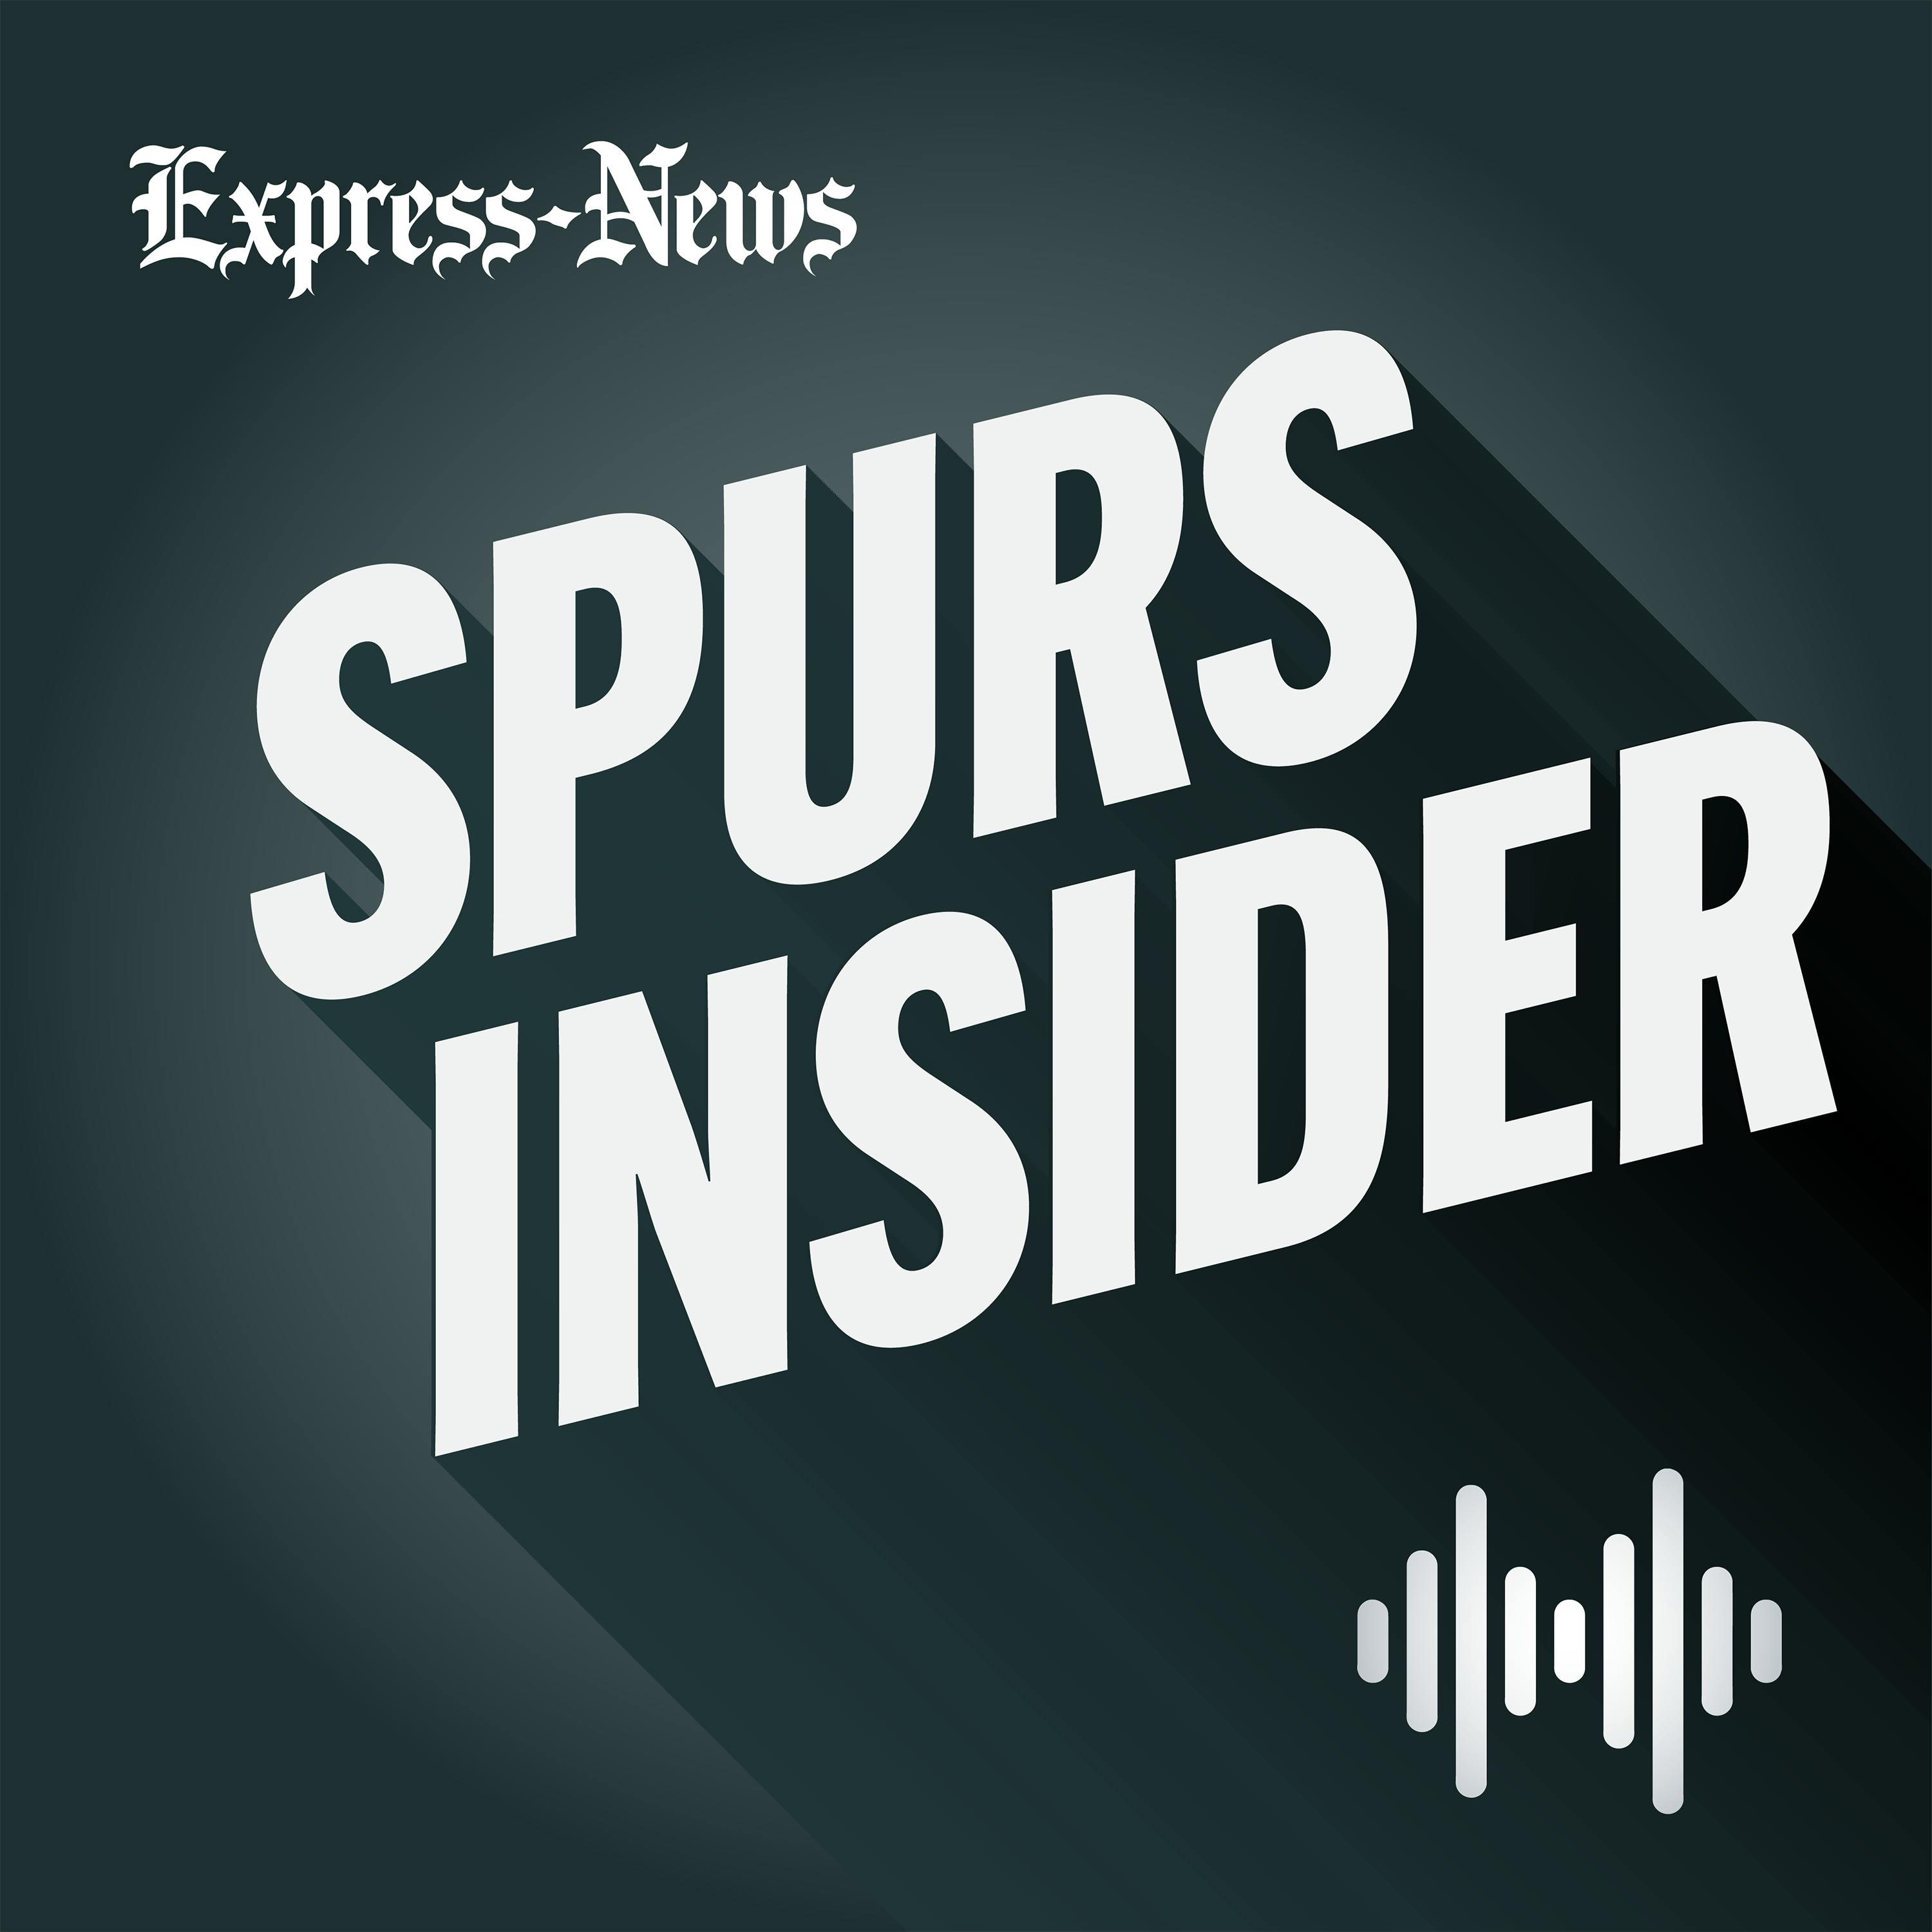 Episode 76: Why are the Spurs having such an up-and-down season?